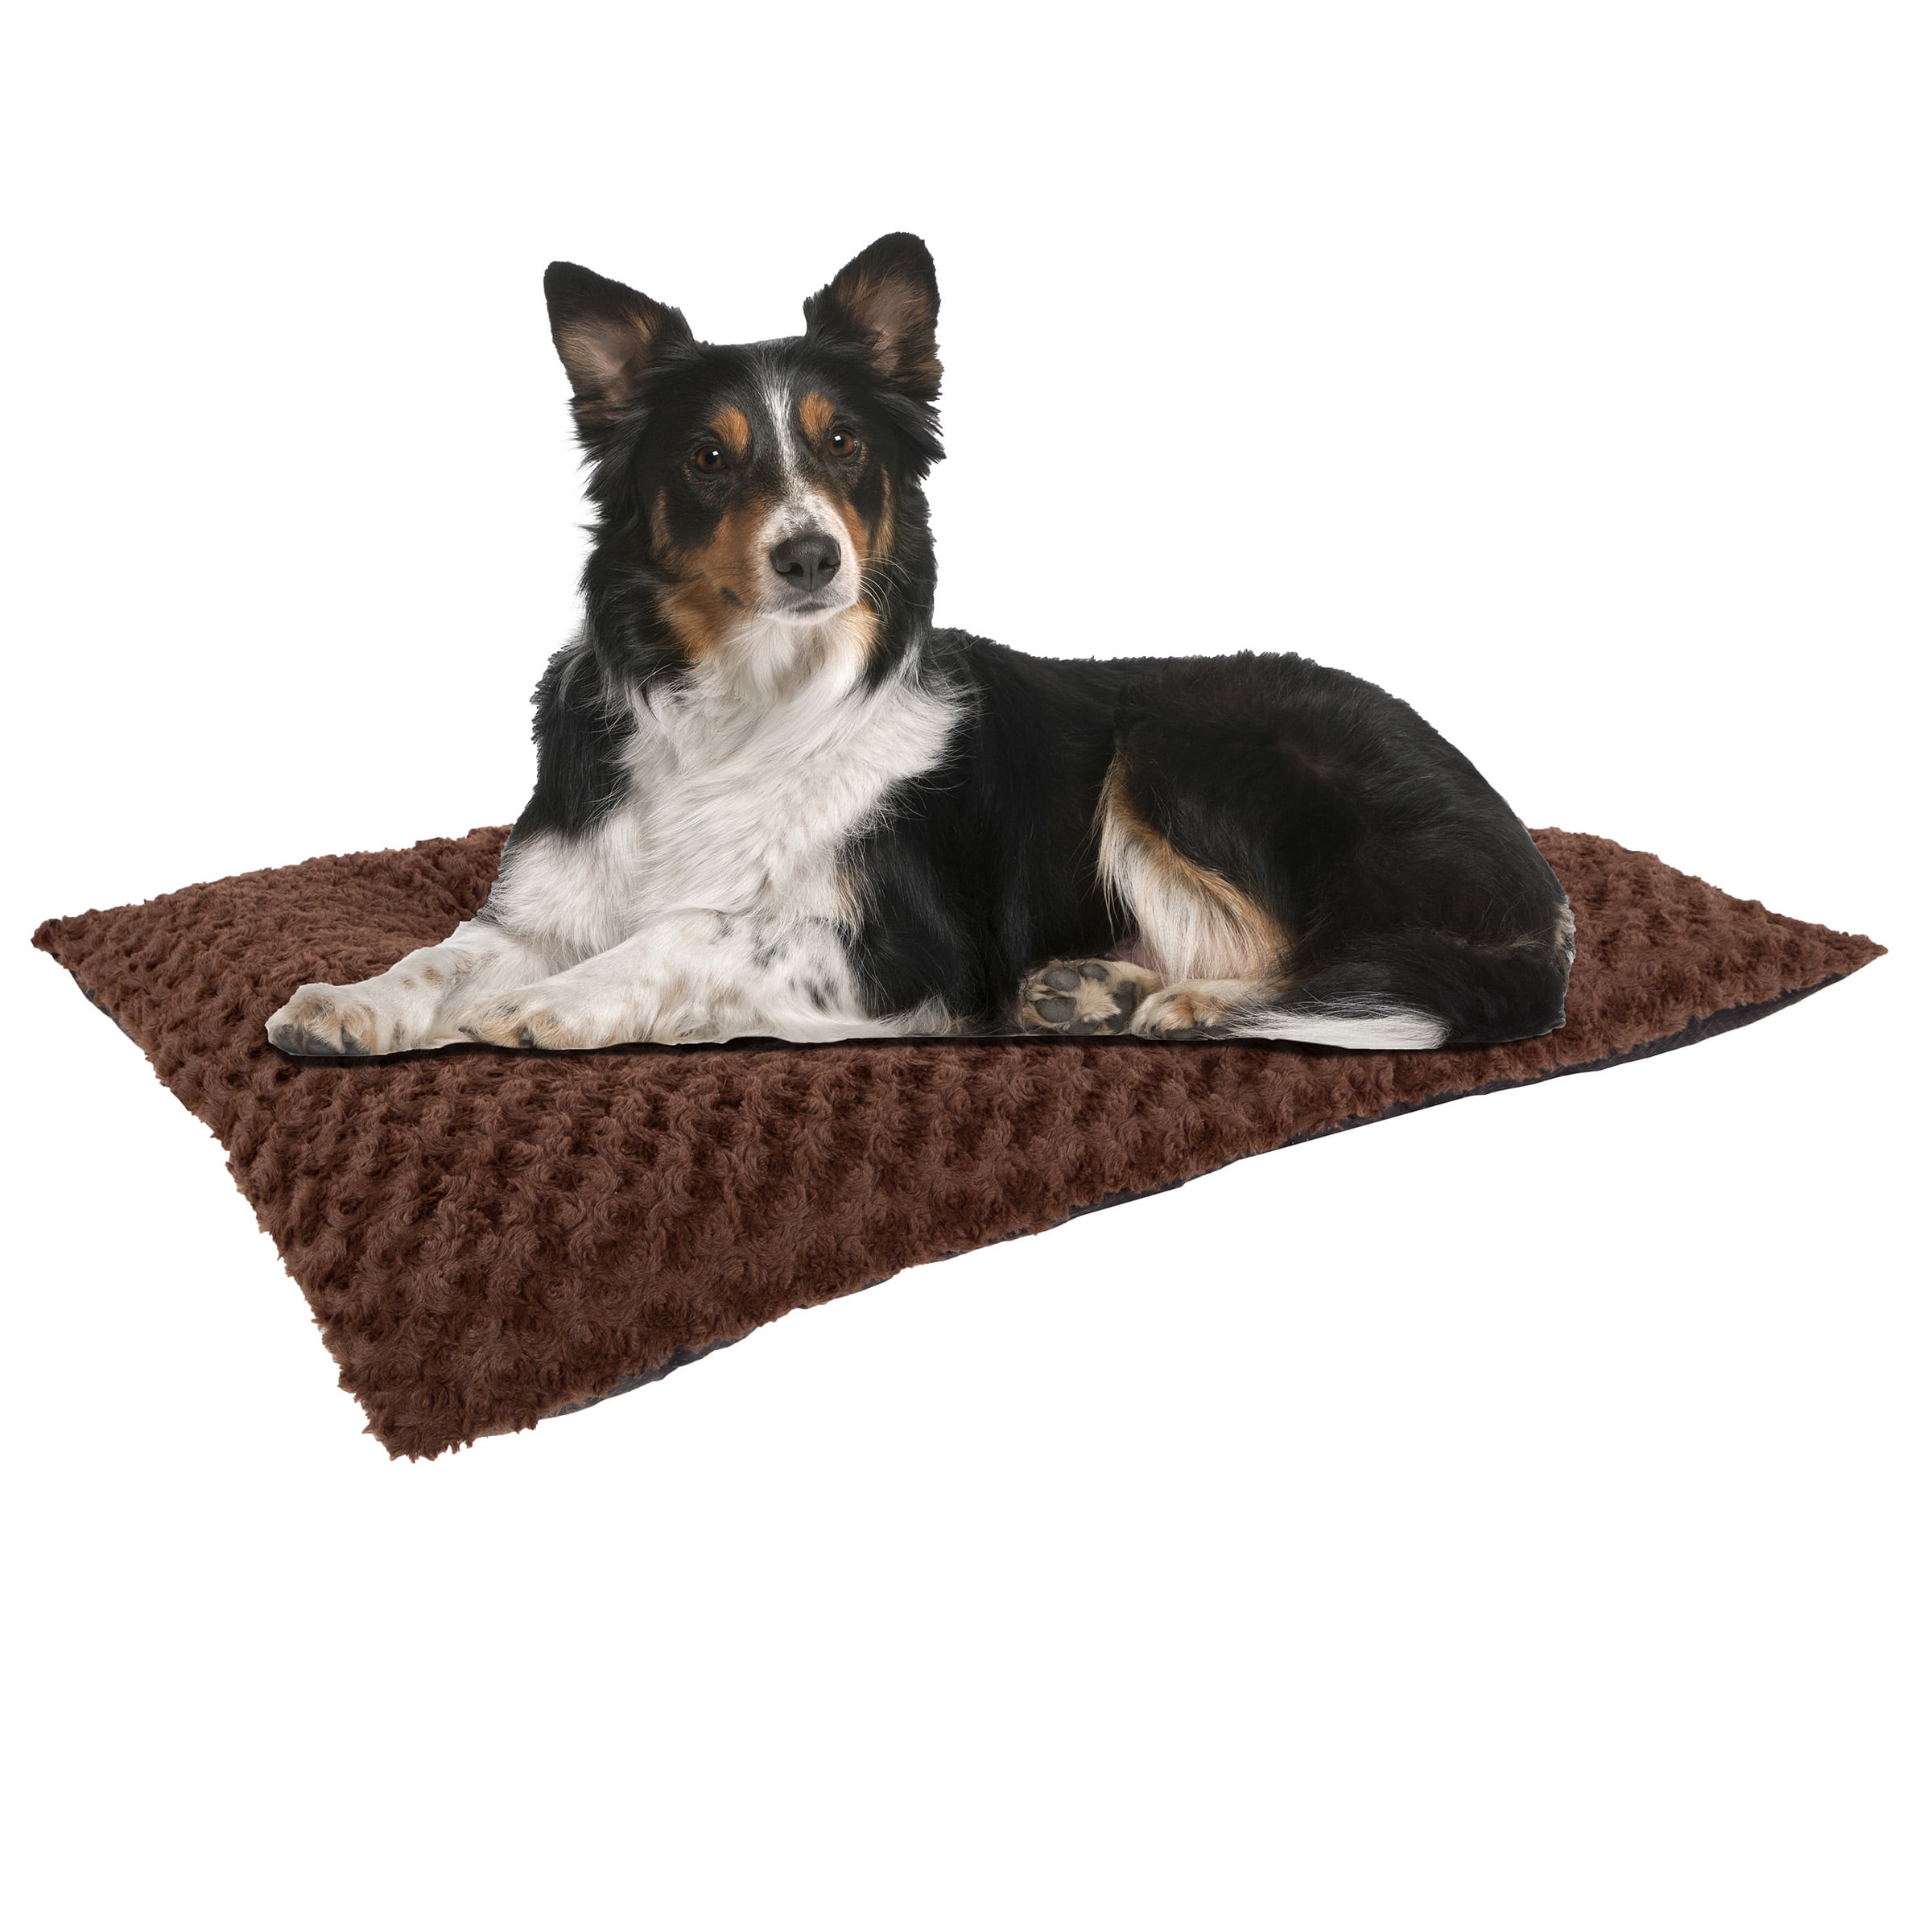 Poohoo Soft Plush Dog Bed,Dog Crate Bed Pet Cushion Pet Pillow Bed Washable,Non-Slip Crate Dog Bed Crate Mat Pet Bed for Medium Large Dogs 